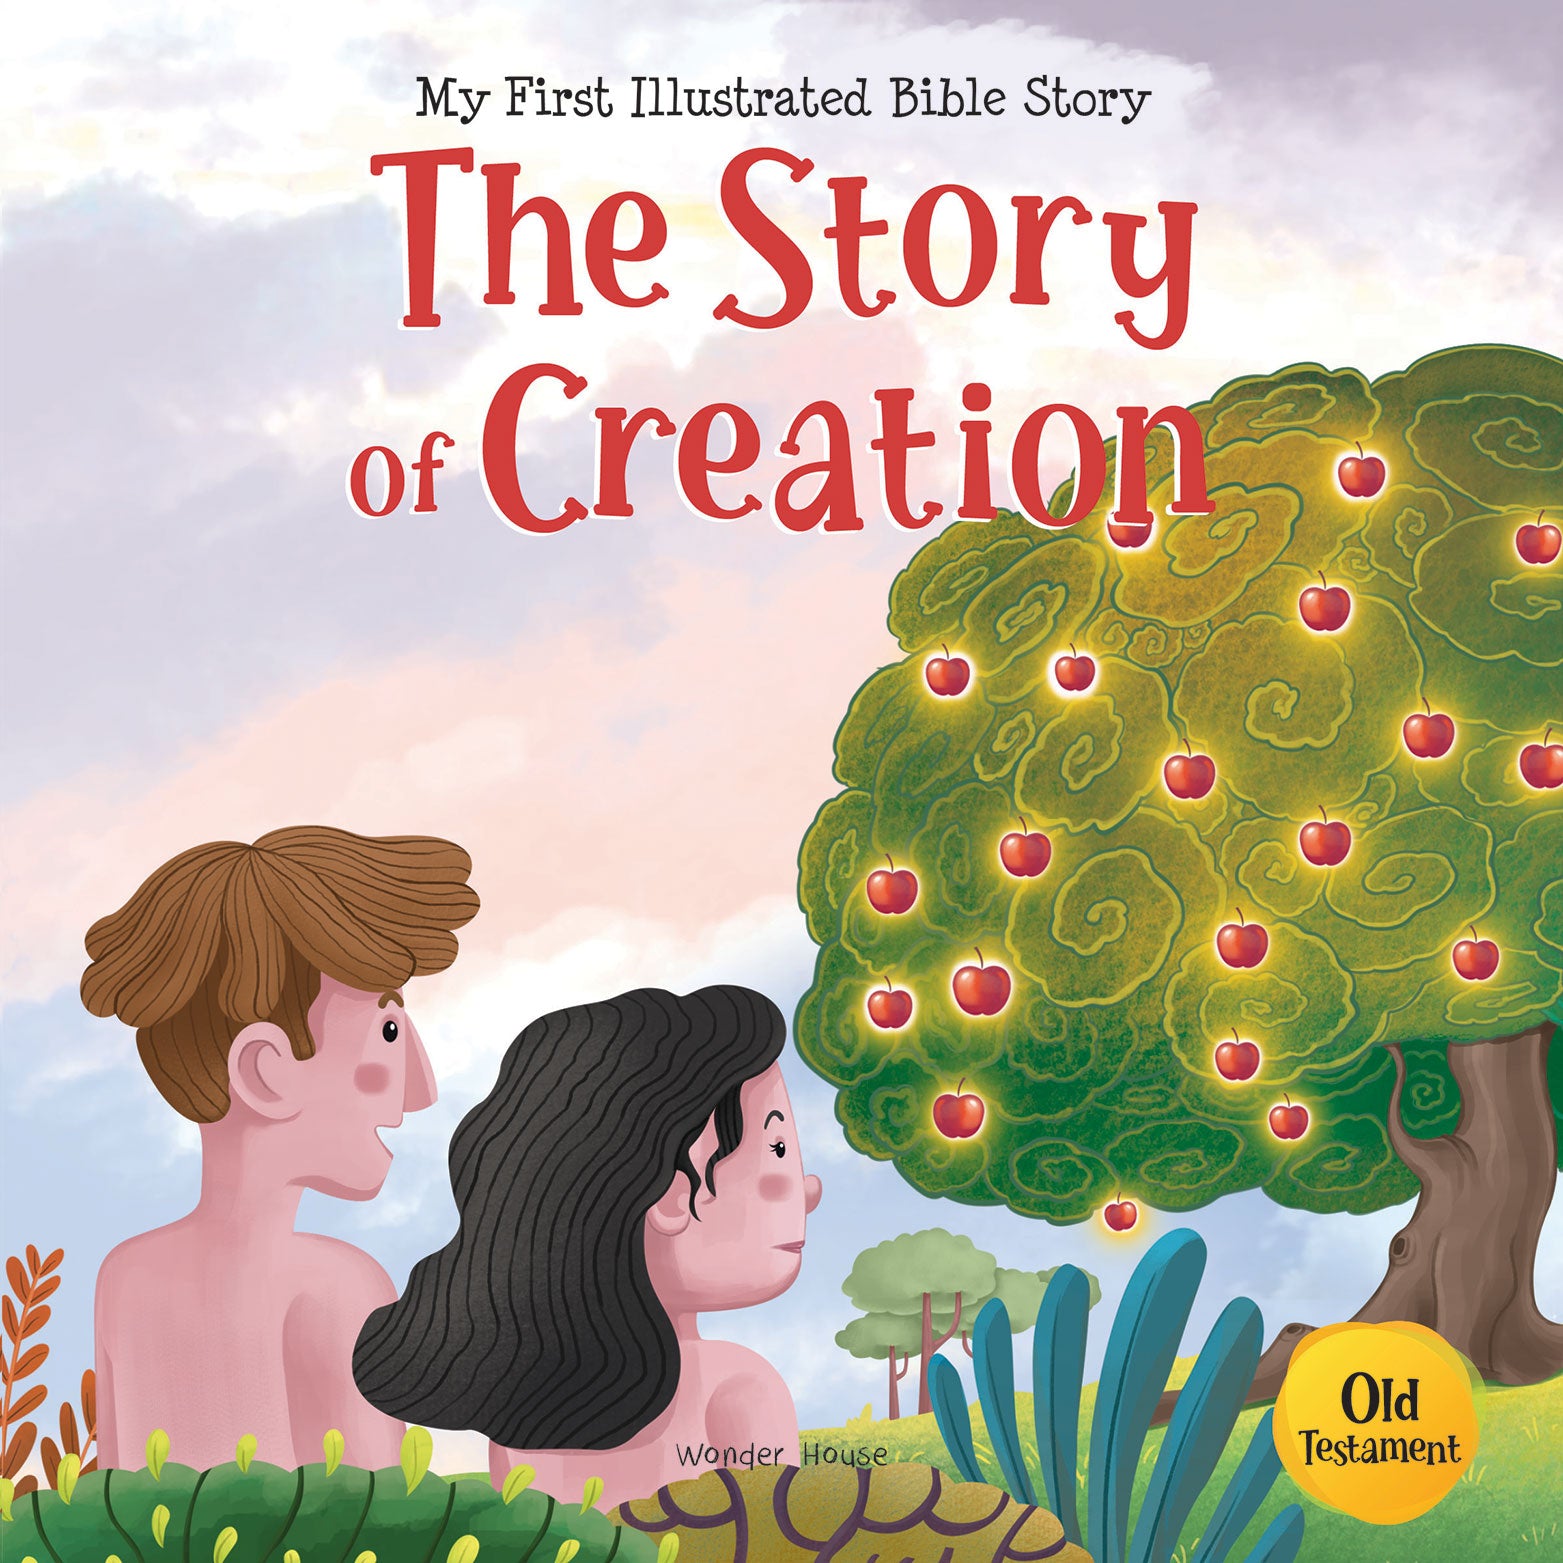 My First illustrated Bible Story: The Story of Creation